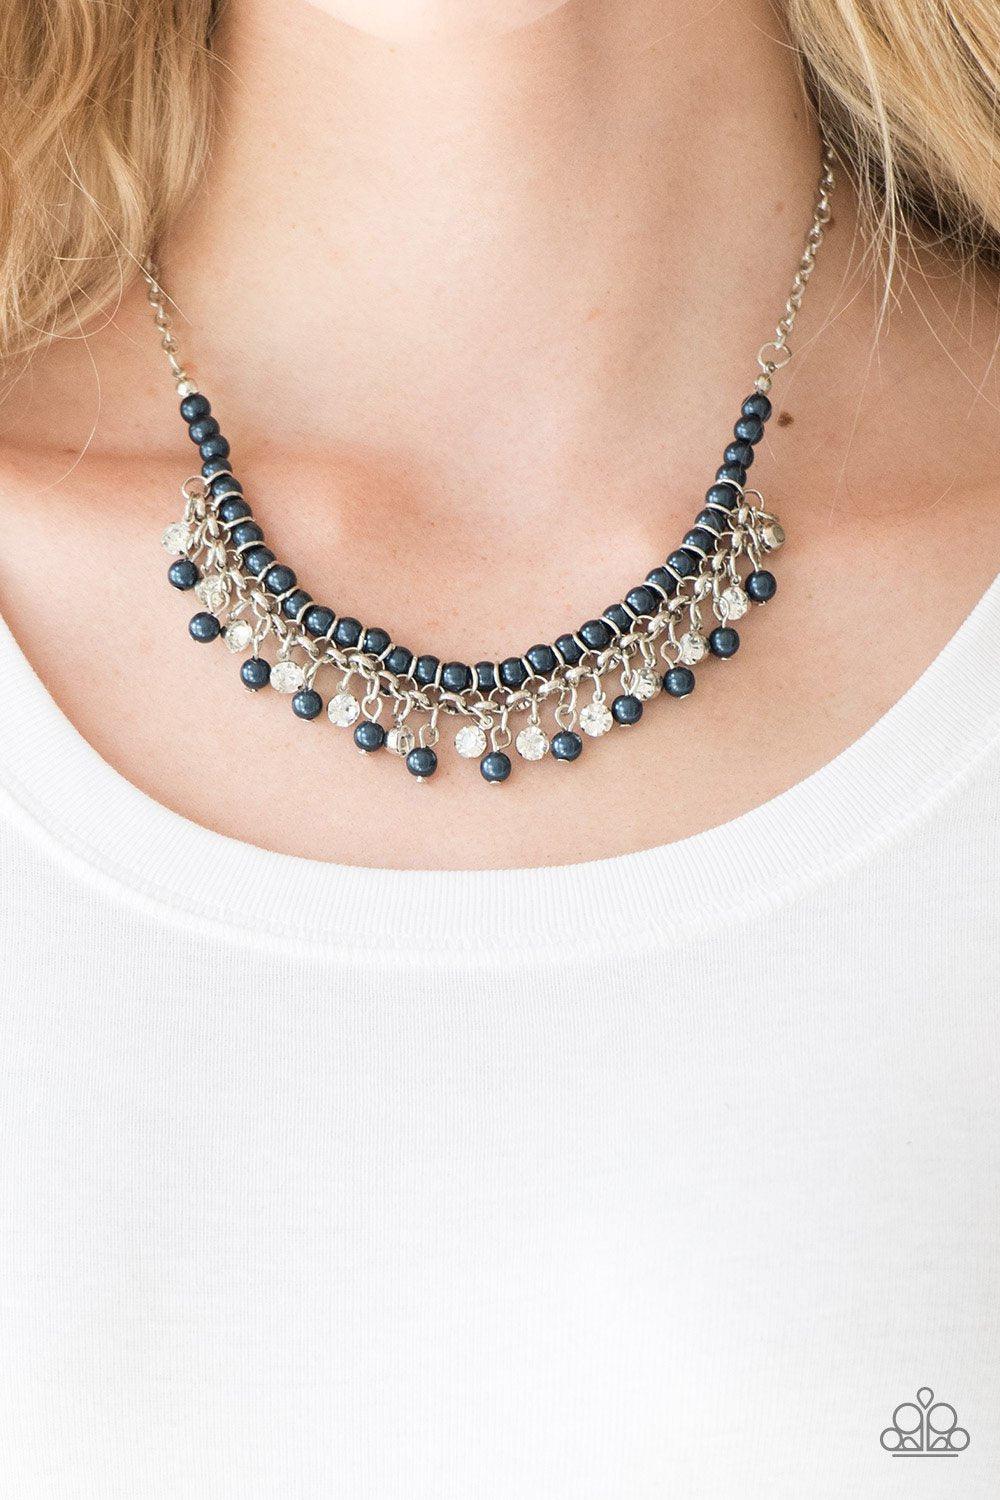 A Touch of CLASSY Blue Pearl and White Rhinestone Necklace - Paparazzi Accessories - model -CarasShop.com - $5 Jewelry by Cara Jewels